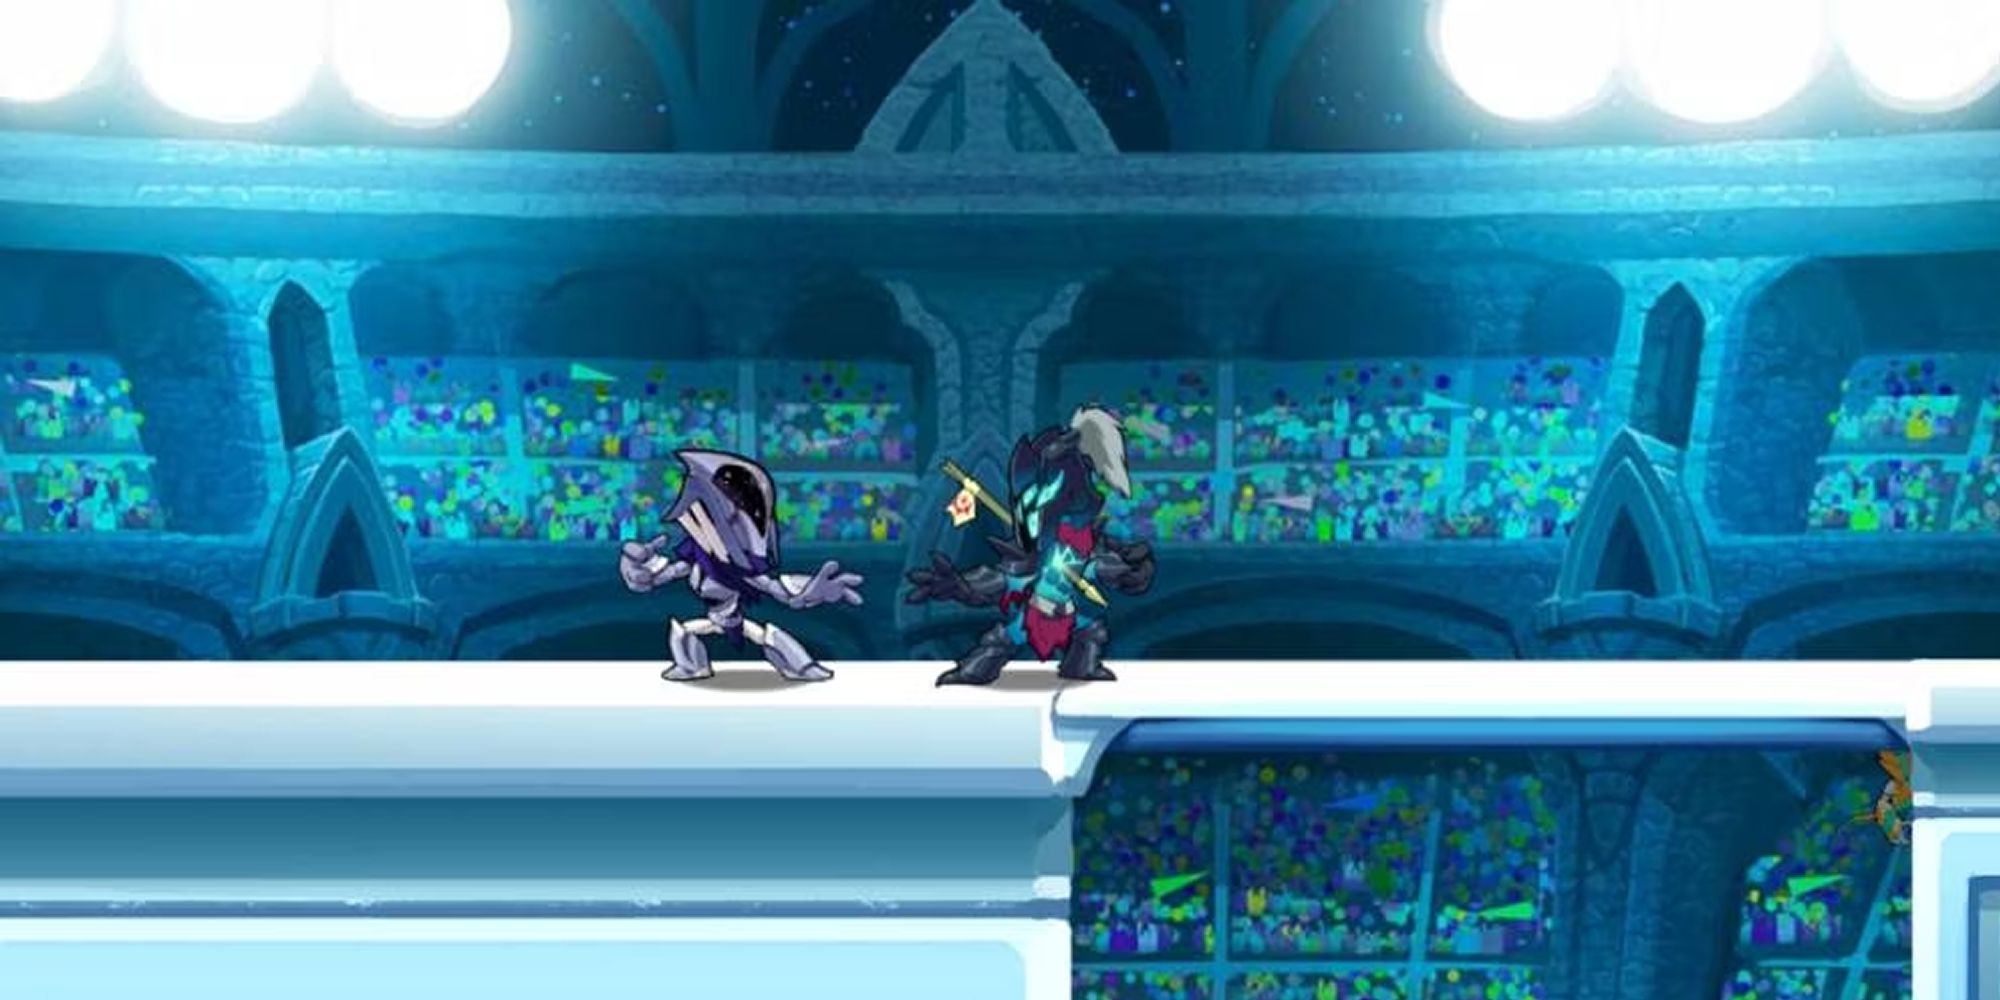 Brawlhalla Magyar Faces An Opponent